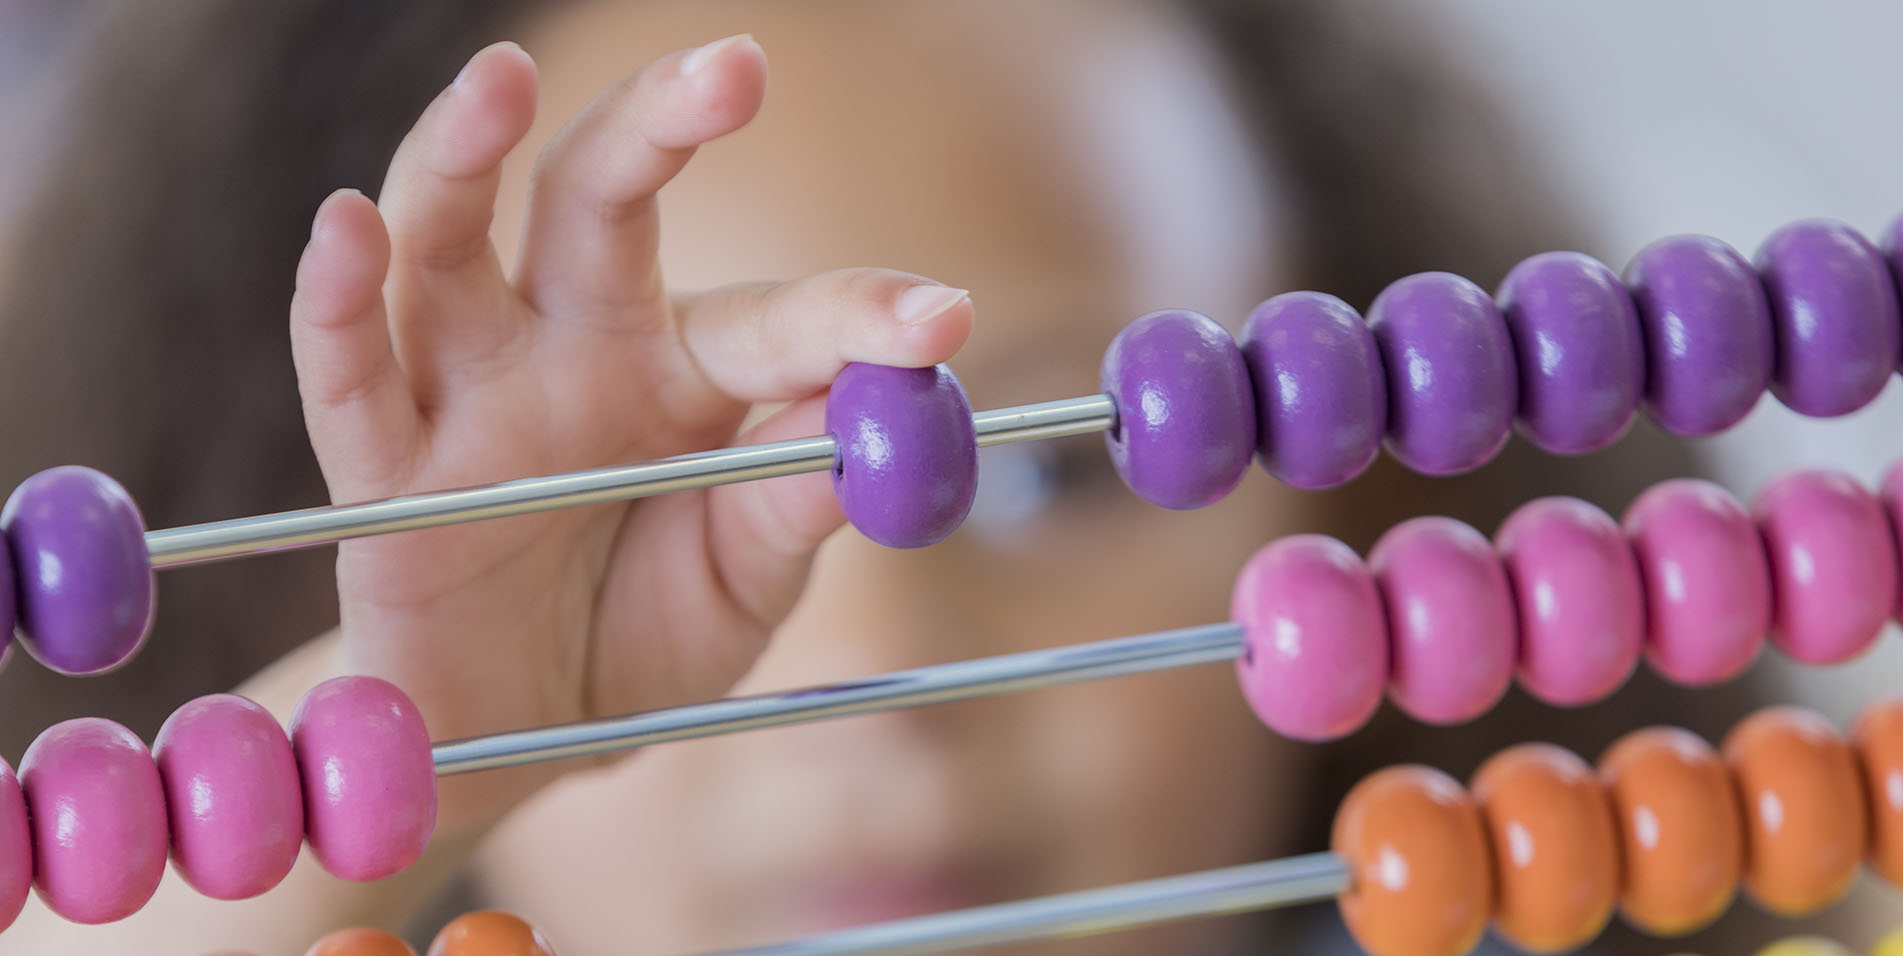 Little girl uses an abacus at school. Focus is on the abacus.